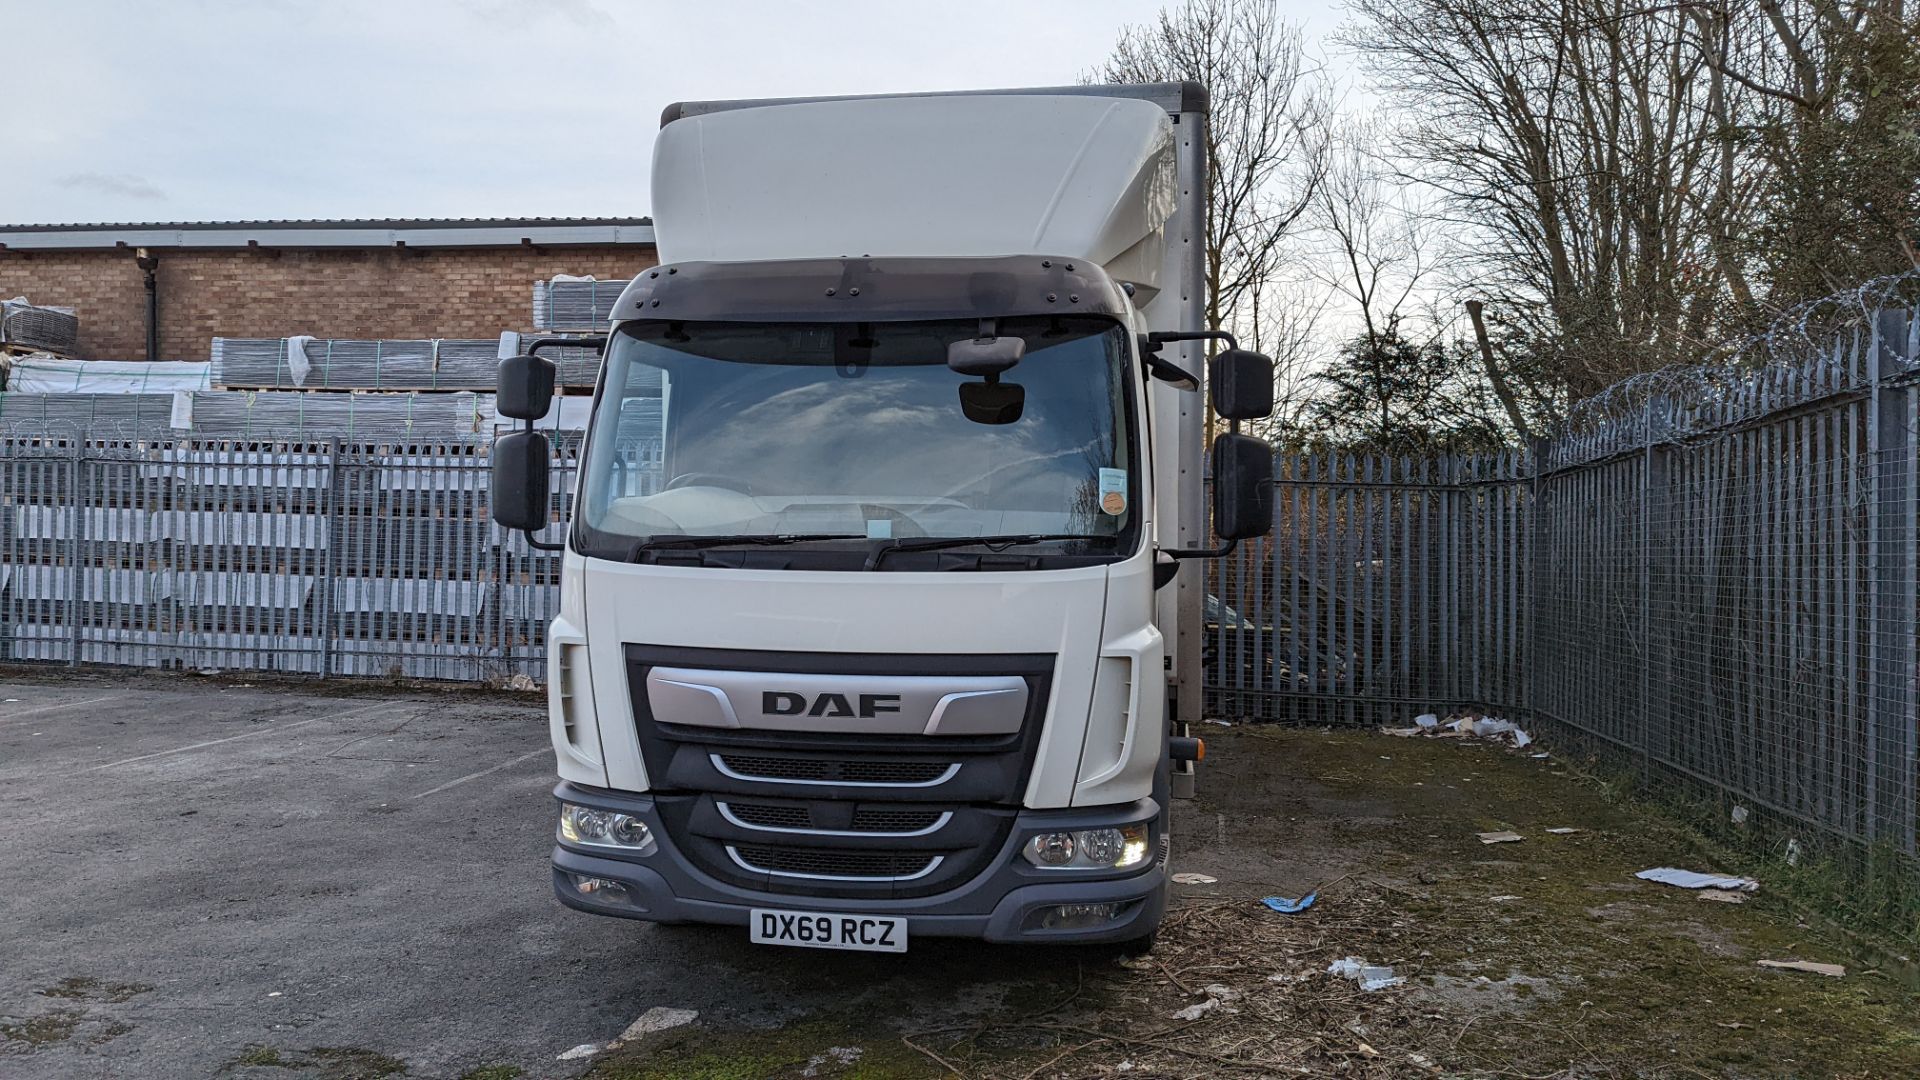 DX69 RCZ DAF LF180FA 12tonne curtain side HGV with 5,150mm Paccar body, 6 speed manual gearbox, 4500 - Image 10 of 67